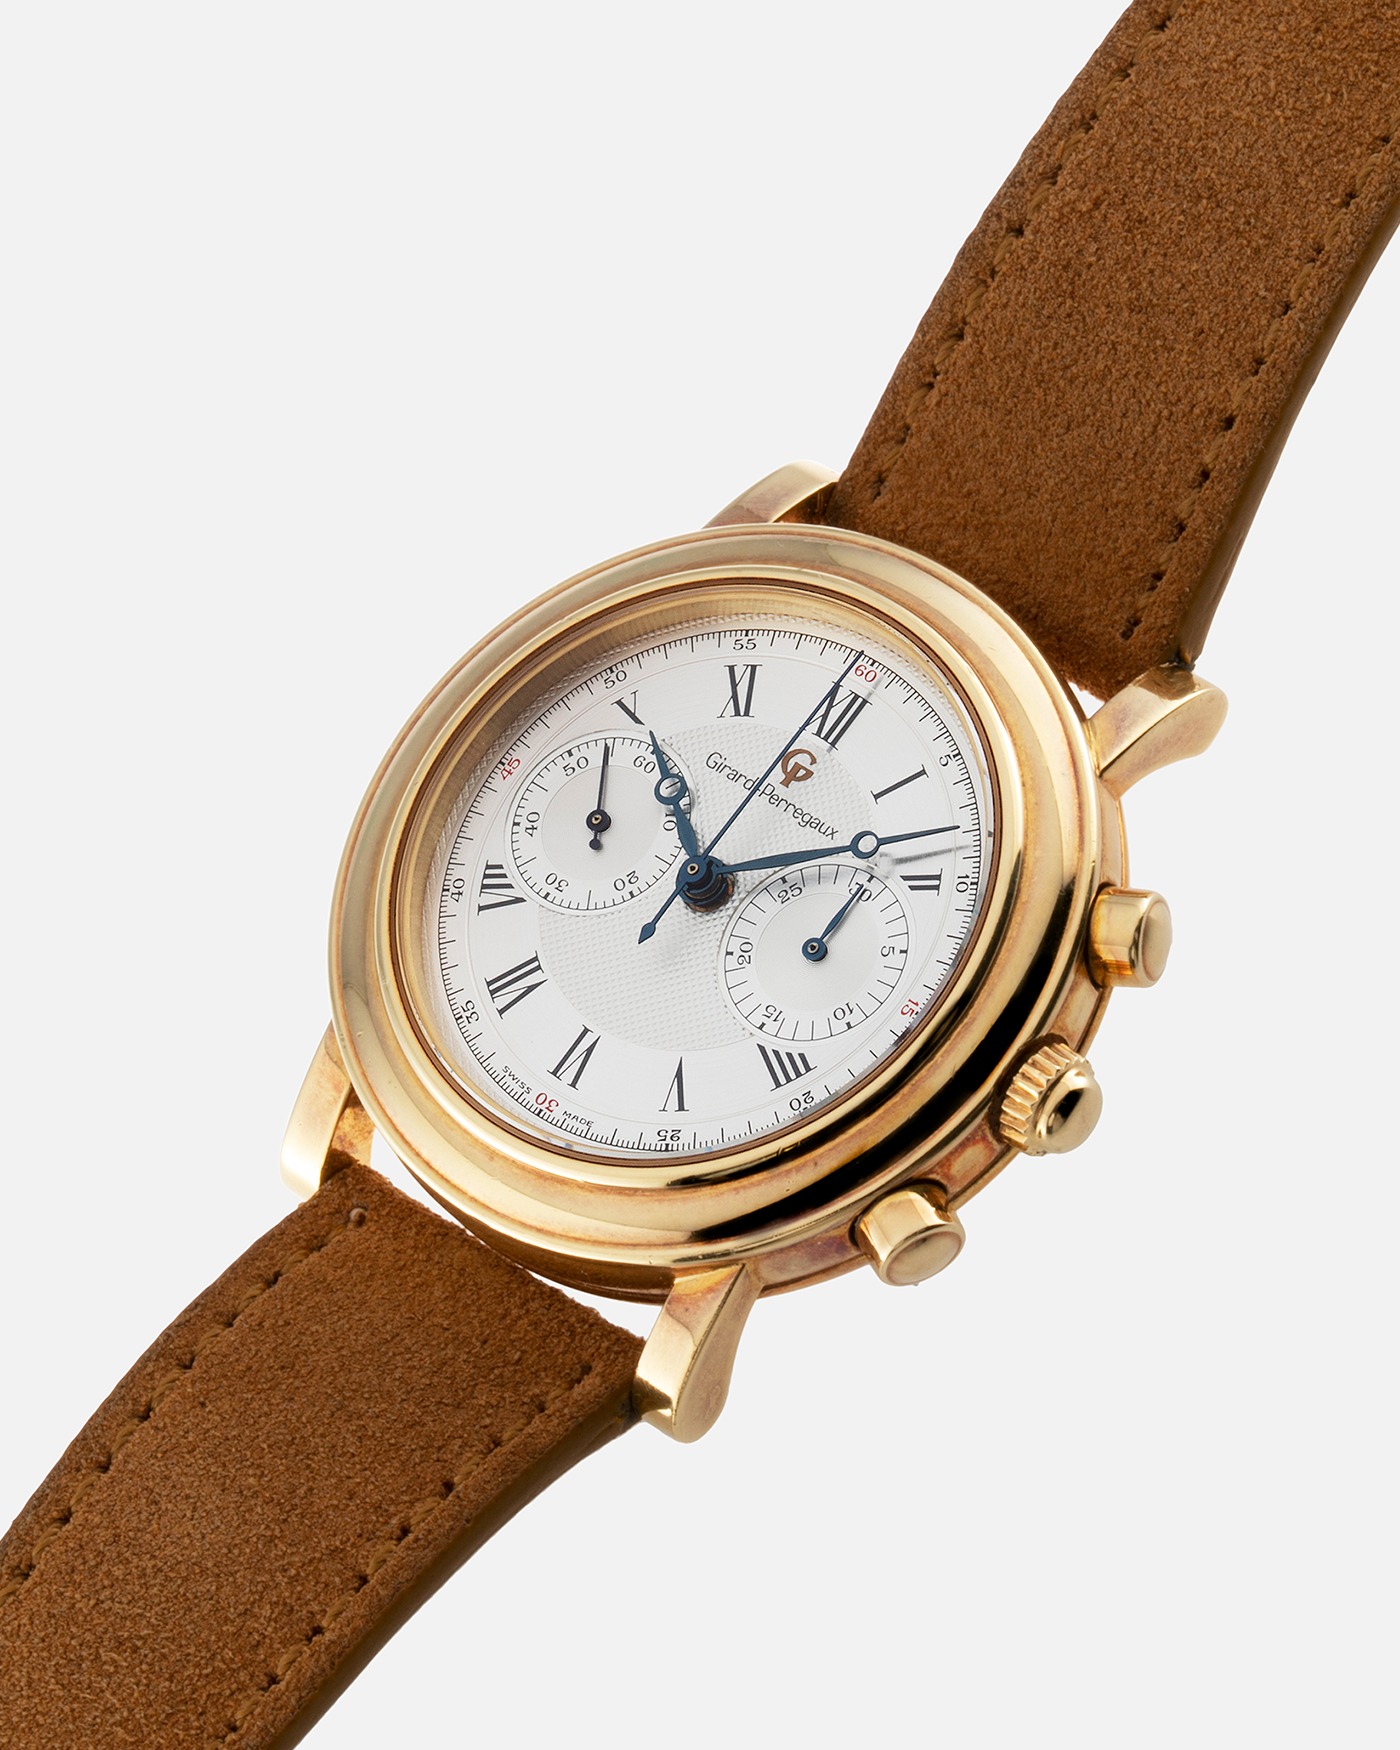 Brand: Girard Perregaux Year: 1990’s Reference Number: 47930 Material: 18k Yellow Gold Movement: Lemania Cal. 1872  Case Diameter: 38mm Strap: Tan Strap and 18k Yellow Gold Girard Perregaux Tan Buckle